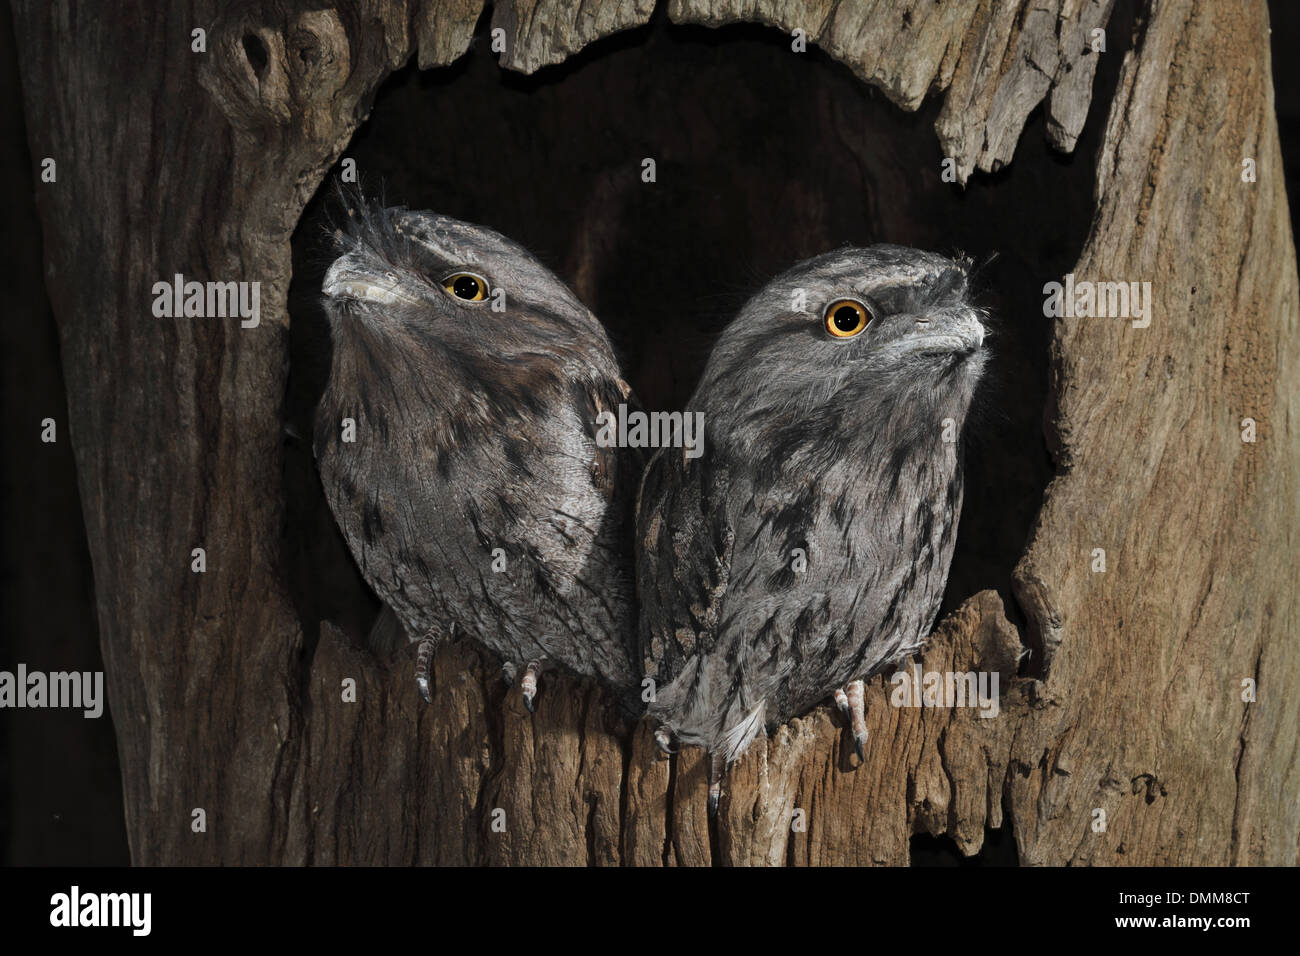 Tawny frogmouth, two adult birds perched in a log hole Stock Photo